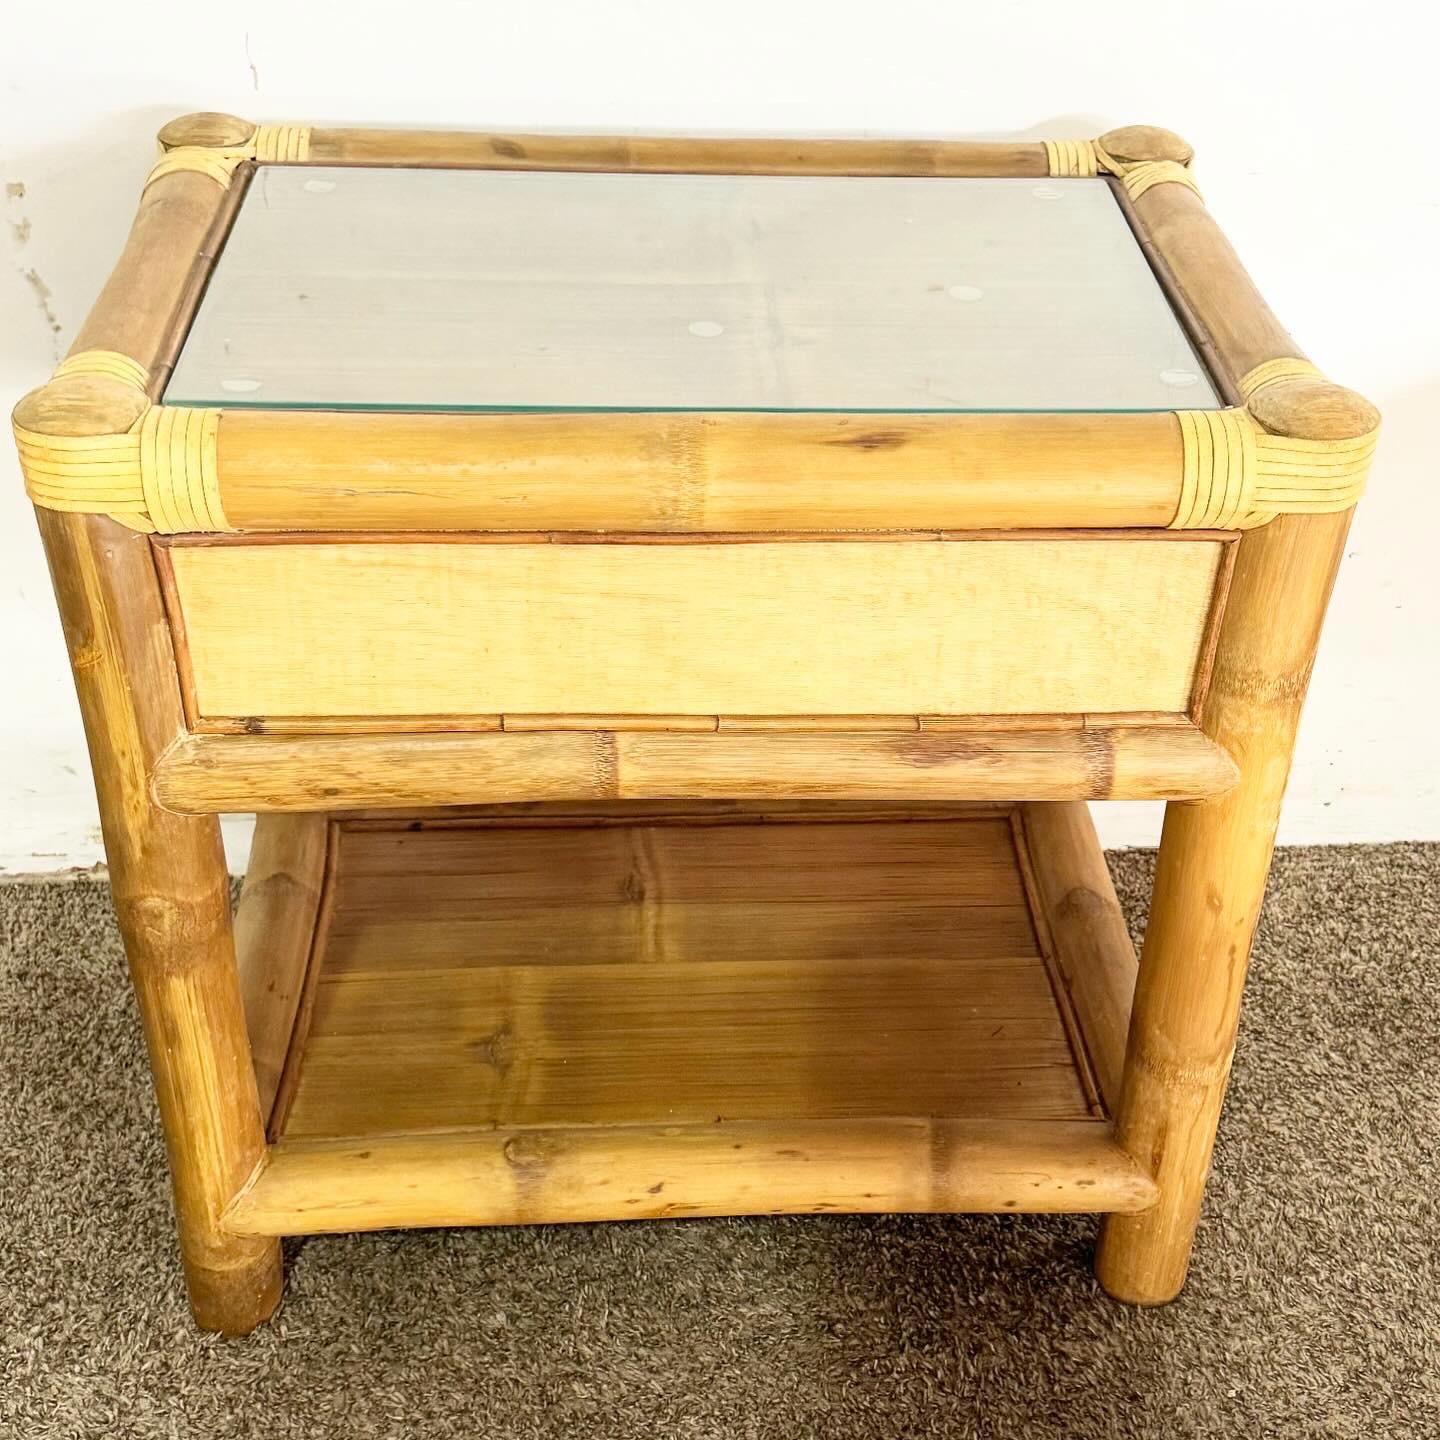 20th Century Boho Chic Bamboo Rattan Nightstand With Glass Top For Sale